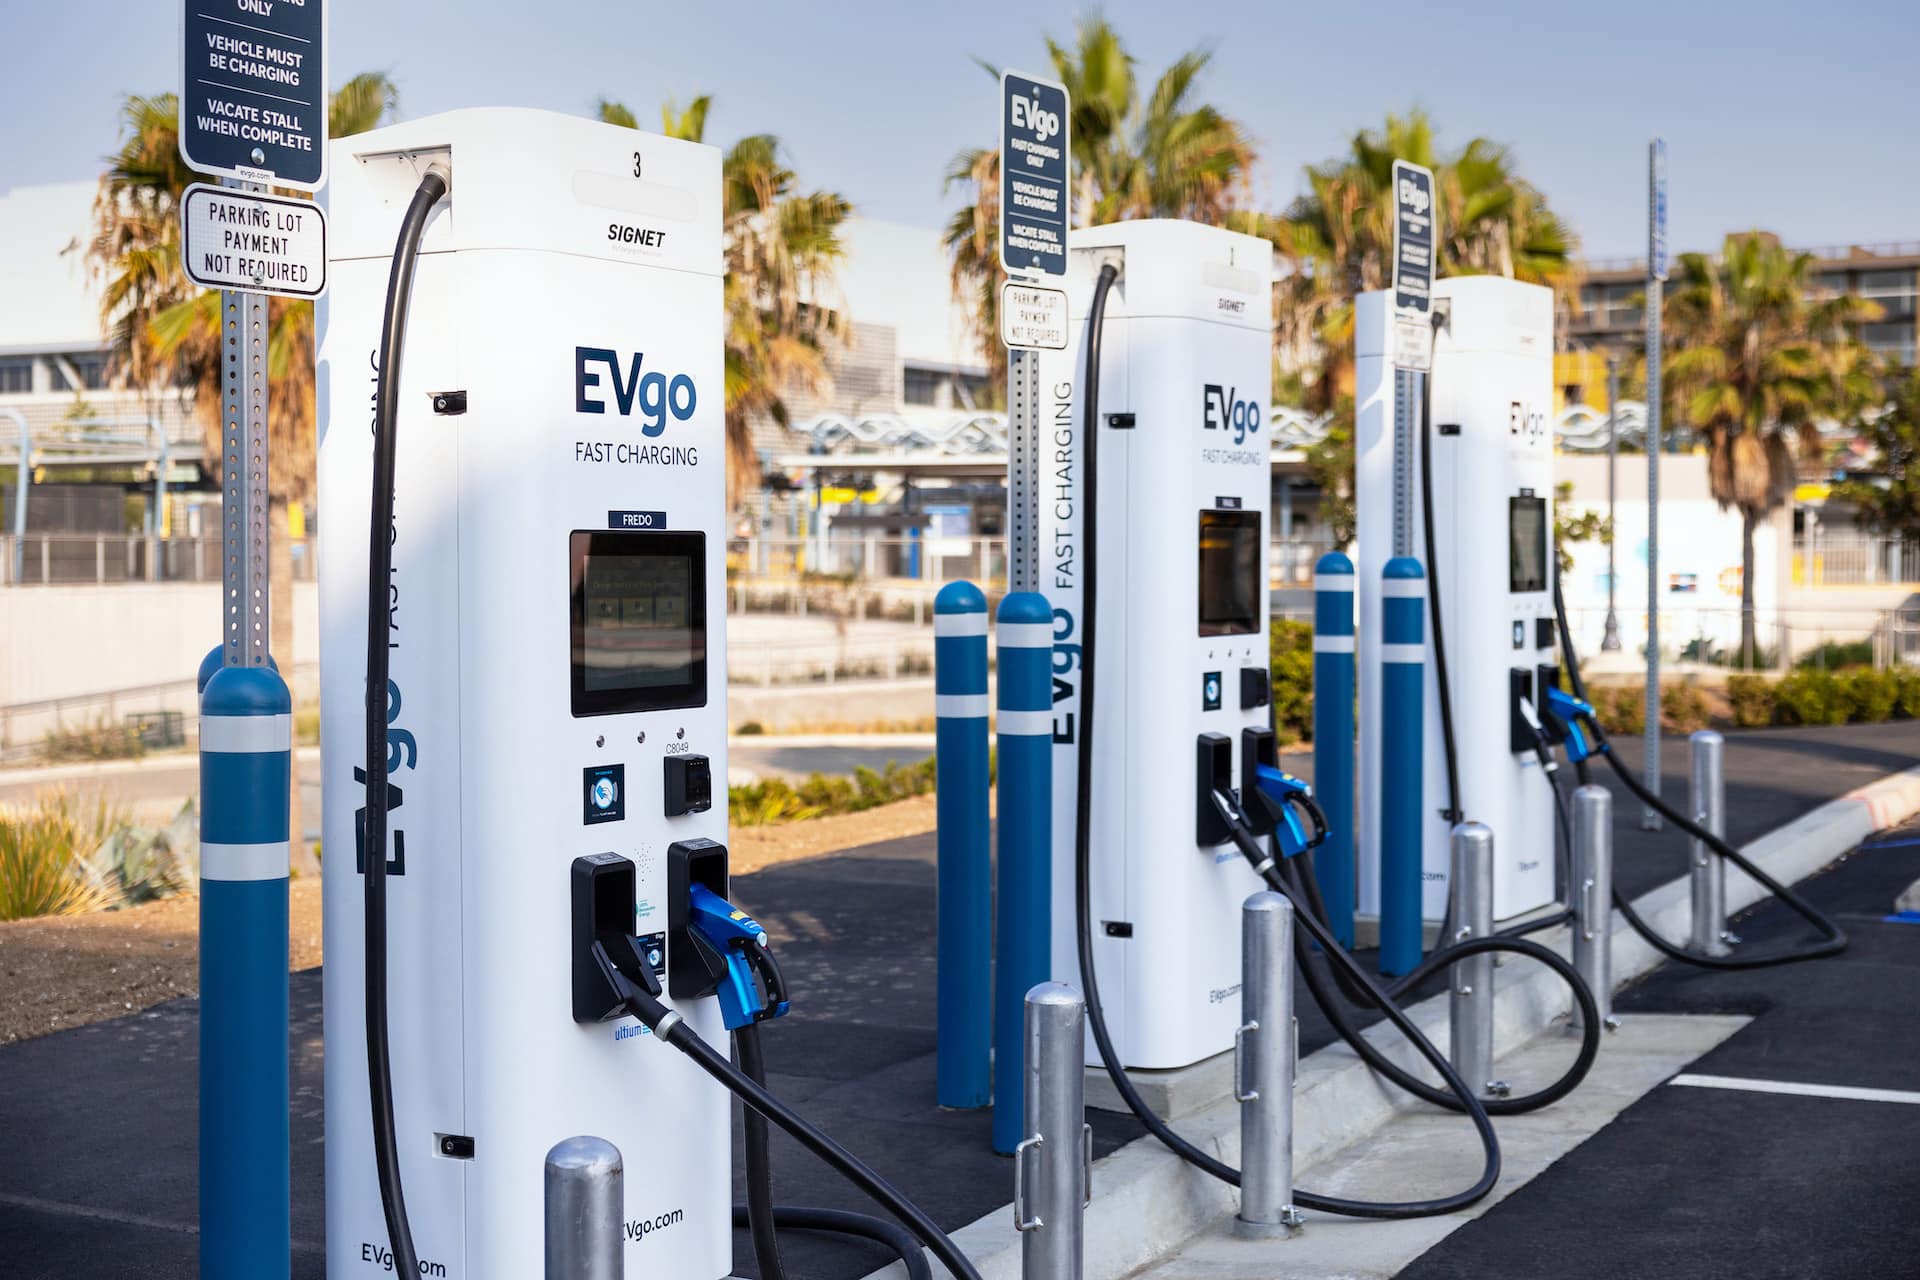 EVgo Inc., one of the largest public fast charging networks for electric vehicles (EVs) in the United States, announced on Monday the launch of EVgo ReNew, an enhanced and comprehensive maintenance program aimed at ensuring that stations across EVgo's charging network meet its quality and technology standards. The program, which will be implemented over the coming year, aims to replace, upgrade, or in some cases retire, hundreds of stations with the goal of enhancing charger availability and building range confidence for EV drivers of all types. The effort includes ramping up in-person preventative health checks of chargers, improving system monitoring, diagnostic, and recovery tools, replacing legacy equipment, and retiring problematic chargers if replacement or upgrade is impractical. EVgo ReNew is divided into six core pillars that outline EVgo's approach to reliability, including prevention, diagnostics, rapid response, analysis, resilience, and continuous customer service. The company will evaluate sites based on historical charger performance, current and forecasted user demand, technical capacity at the location, and proximity to other fast charging stations. "The EVgo ReNew program represents our ongoing dedication to reliability as we proactively modernize legacy infrastructure and work to deliver the consistent, high-quality charging experience customers expect across our network," said Cathy Zoi, CEO at EVgo. The company aims to install new chargers with power levels up to 350kW and will work with site host partners to assess factors like charger placement, station size, and power levels to ensure charging options provide the greatest value for their customers and the community. The program is designed to ensure that all EV drivers will be able to take advantage of reliable, convenient, and fast charging sessions across EVgo's nationwide network. During the first three quarters of 2022, EVgo upgraded, replaced or removed 125 charging stalls and is actively working with partners and site hosts to evaluate upgrading, replacing, or removing hundreds of additional charging stalls in 2023.